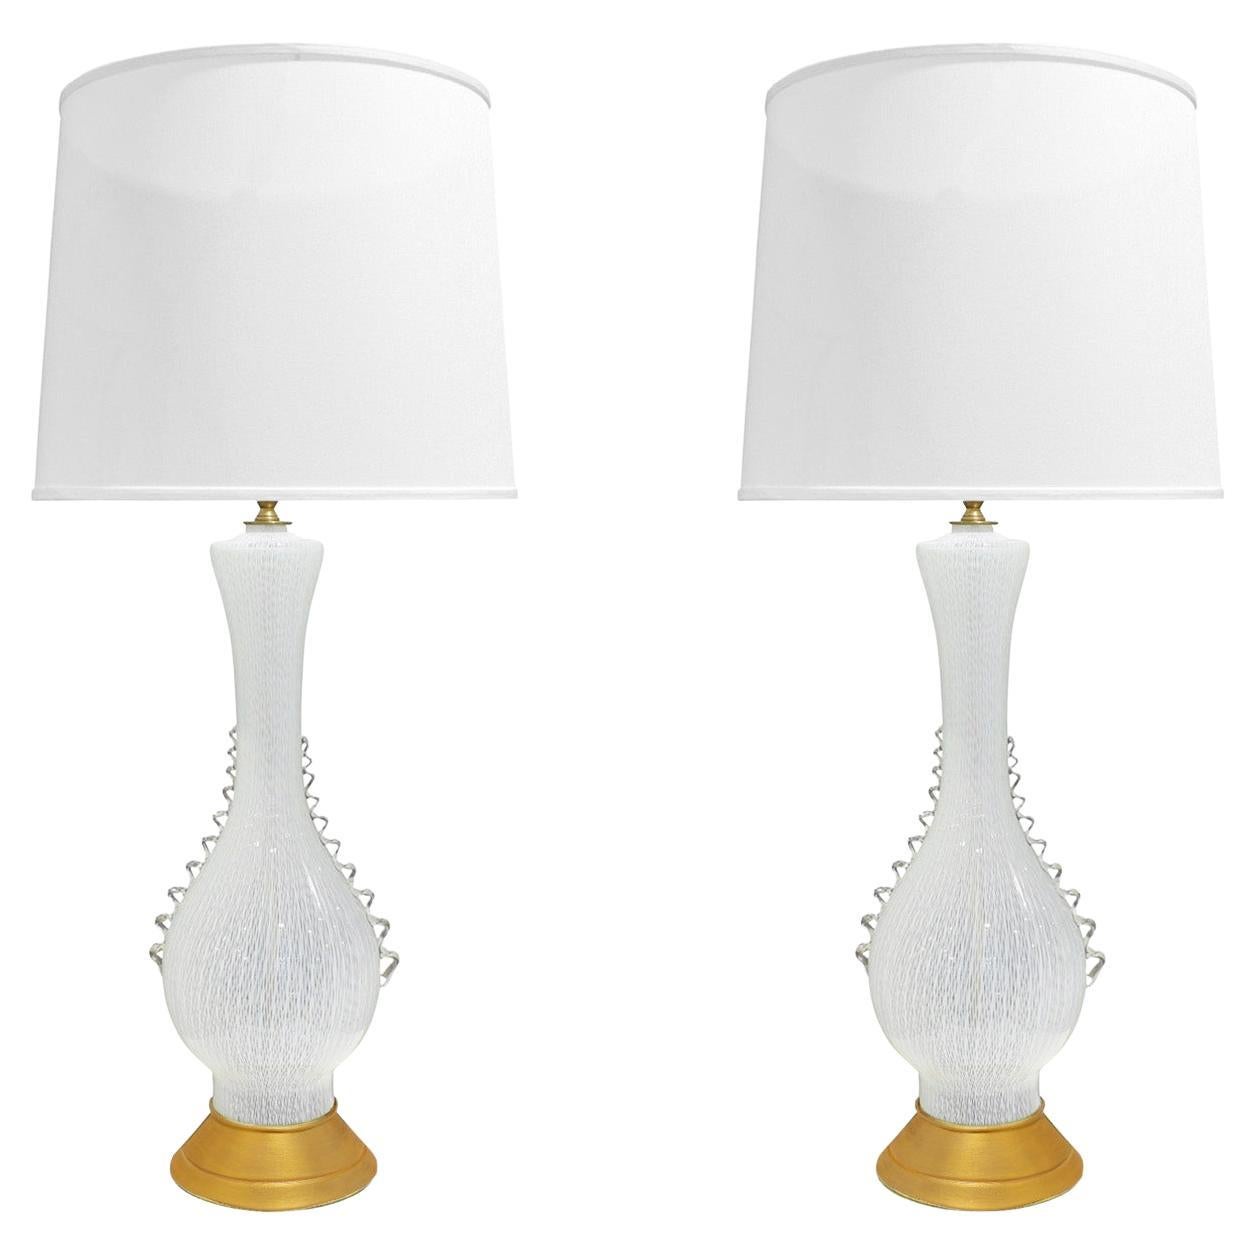 Aureliano Toso Pair of Exquisite Hand Blown Table Lamps, 1950s For Sale